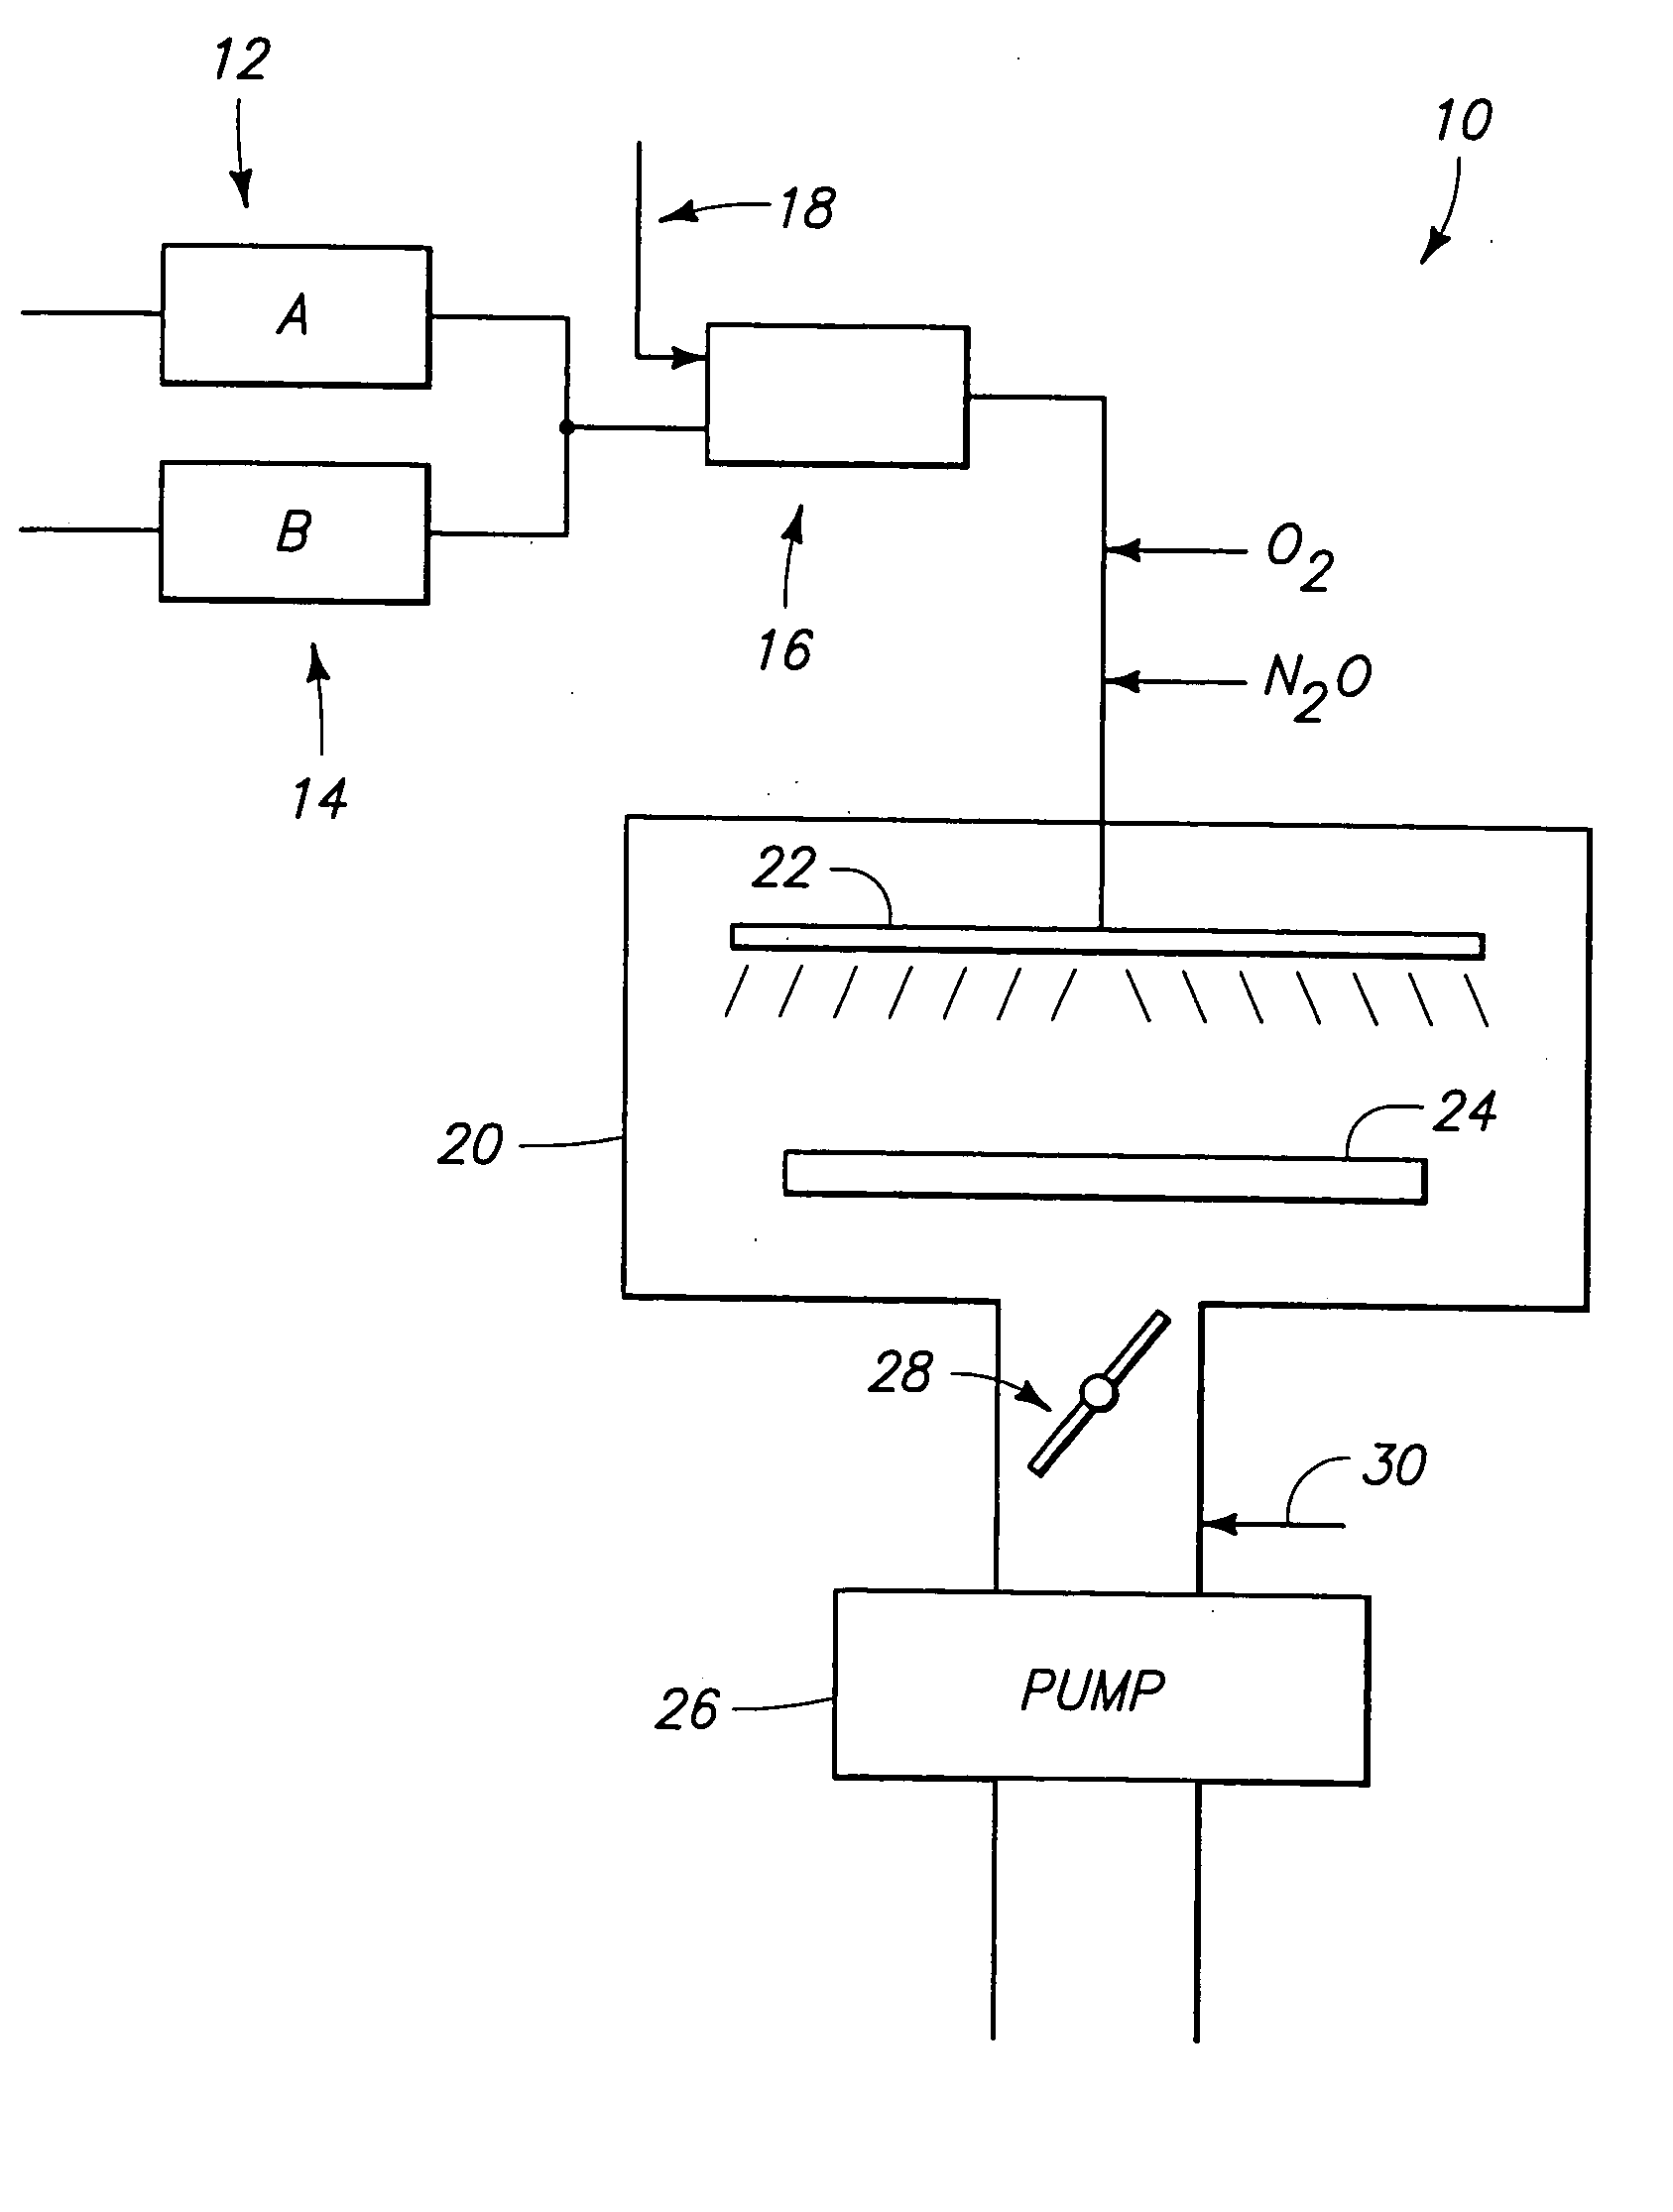 Method of forming a capacitor